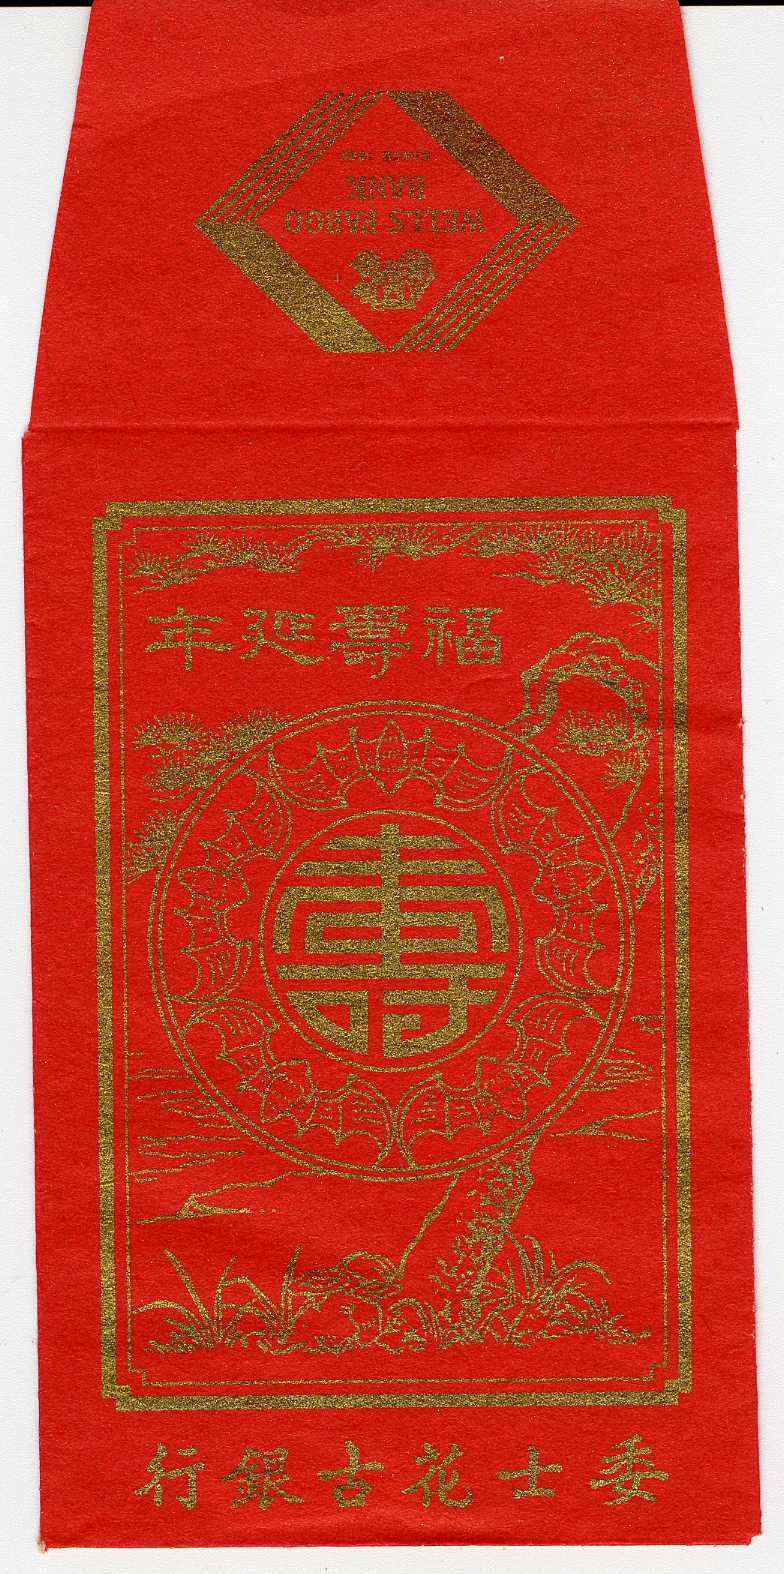 Red envelope with gold foil design of Chinese characters. Image link will enlarge image.